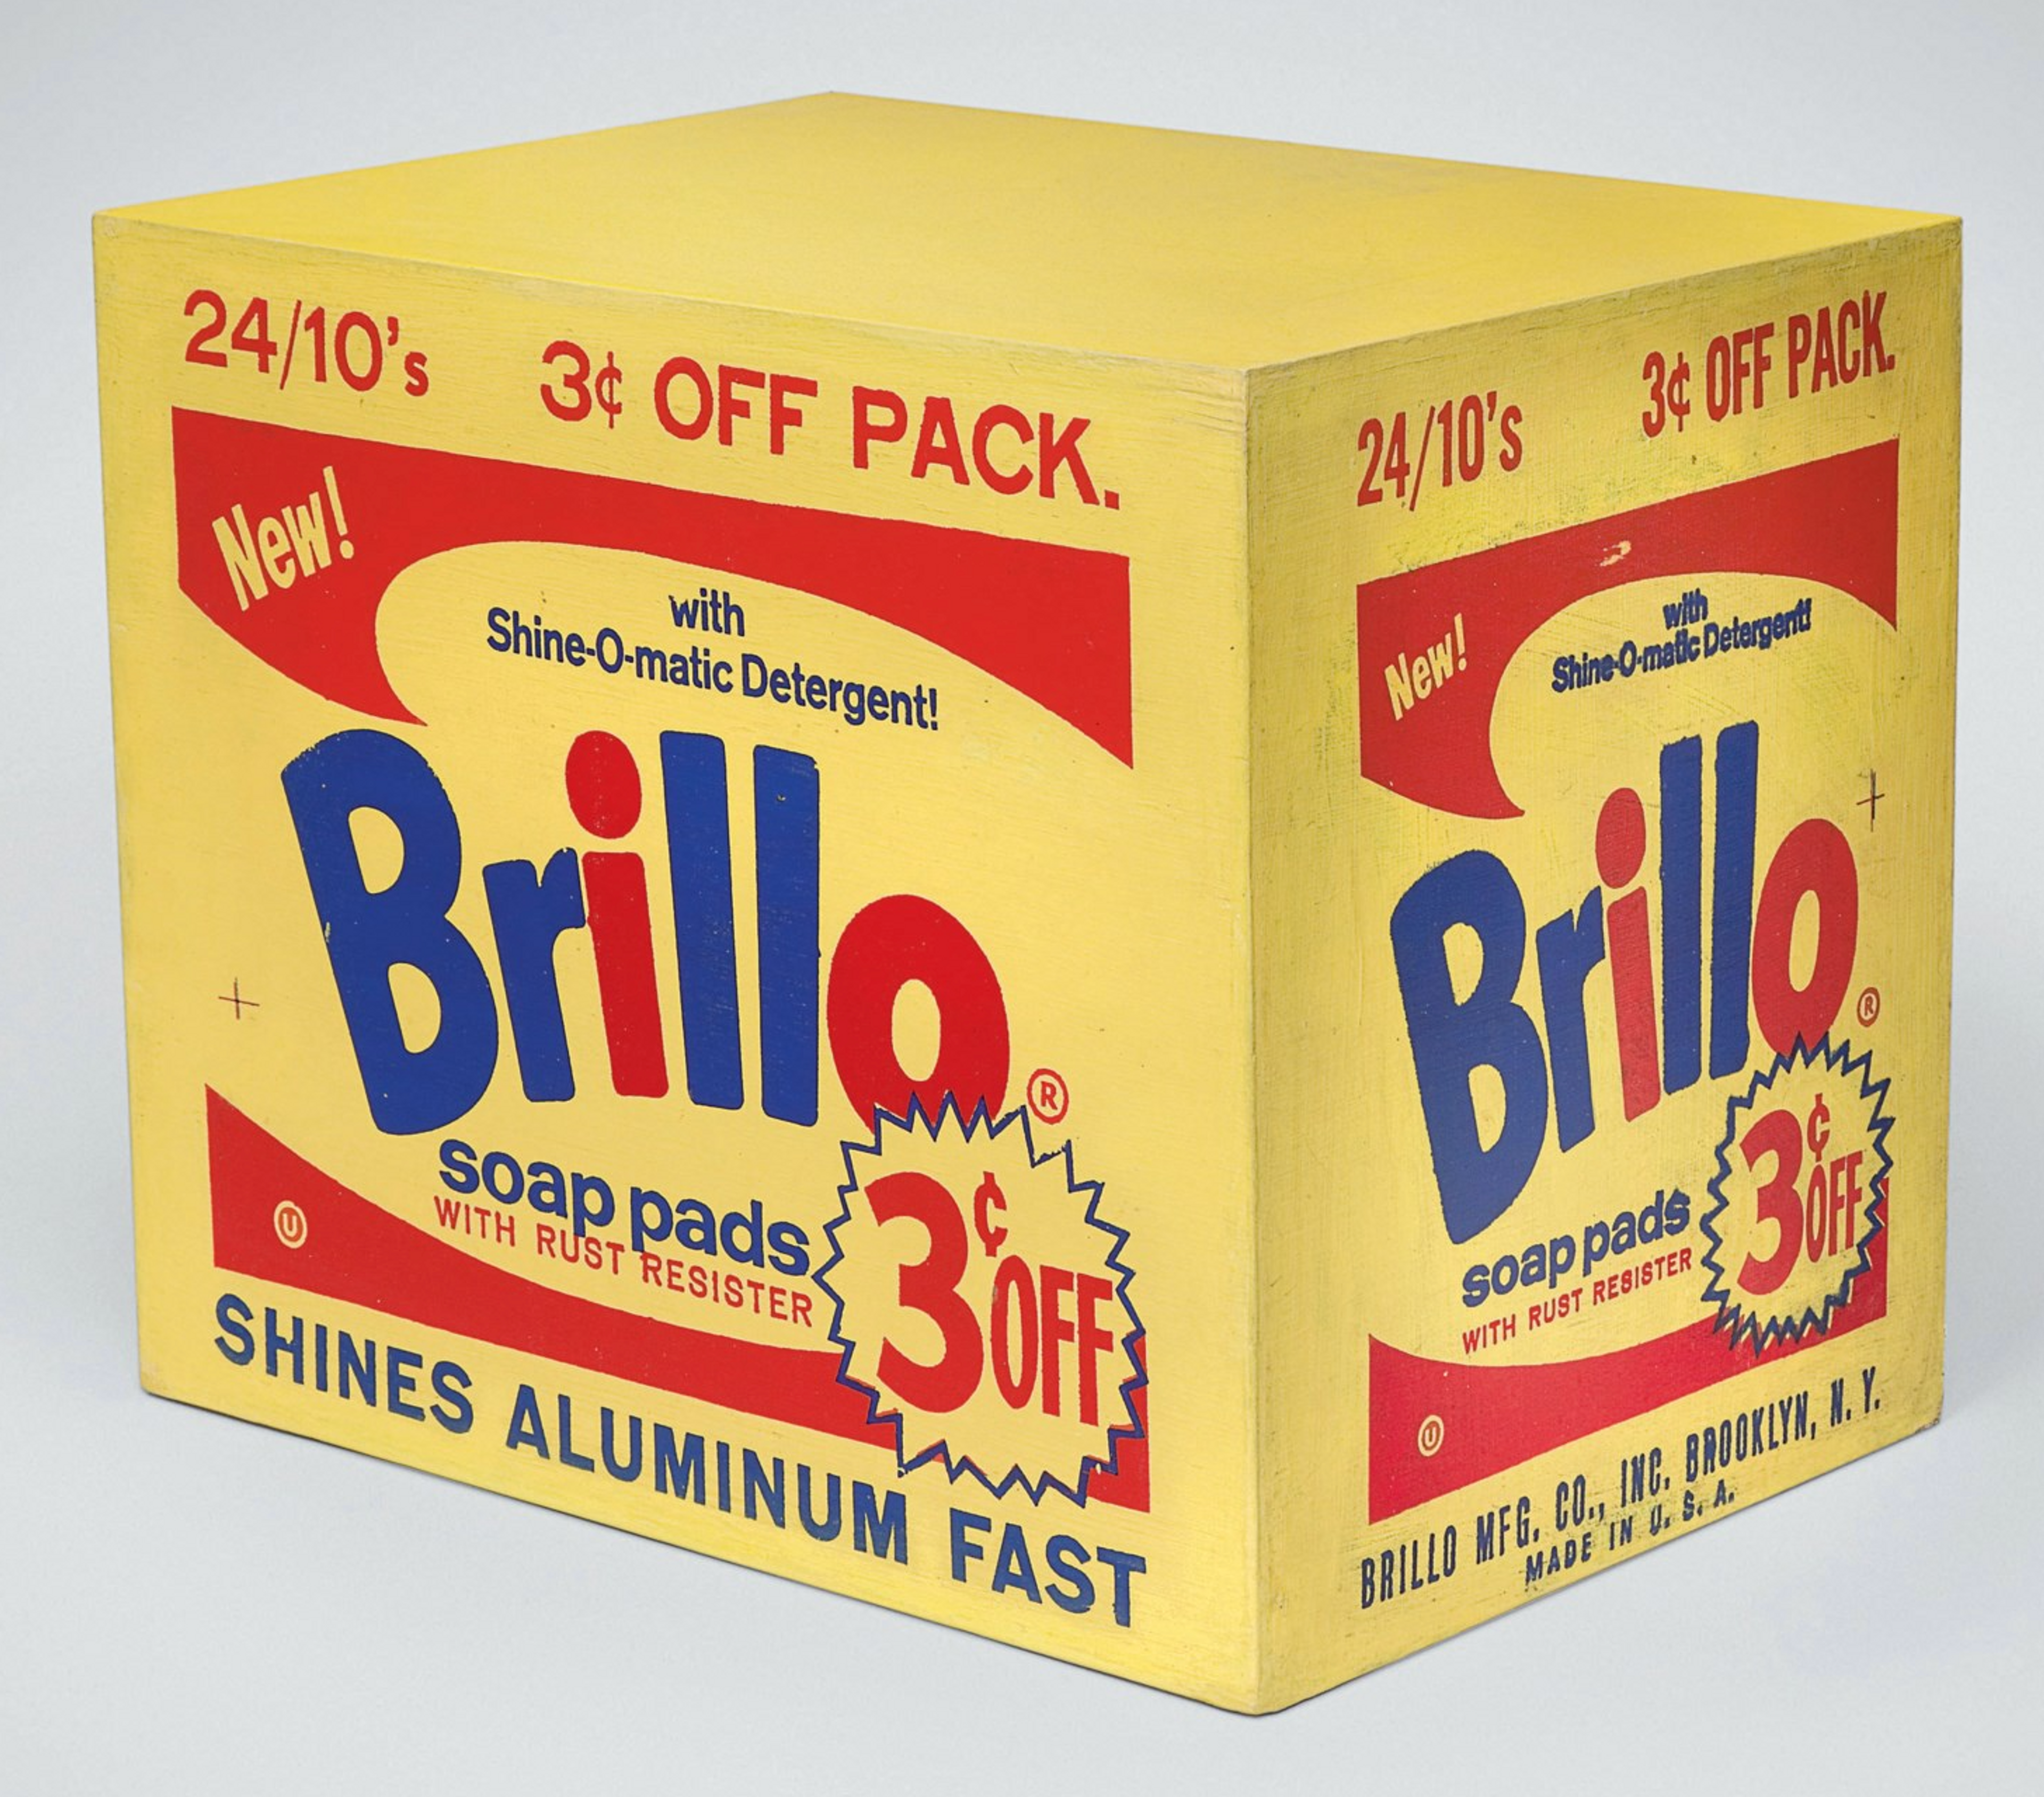 Brillo Box (3 Cents Off) by Andy Warhol